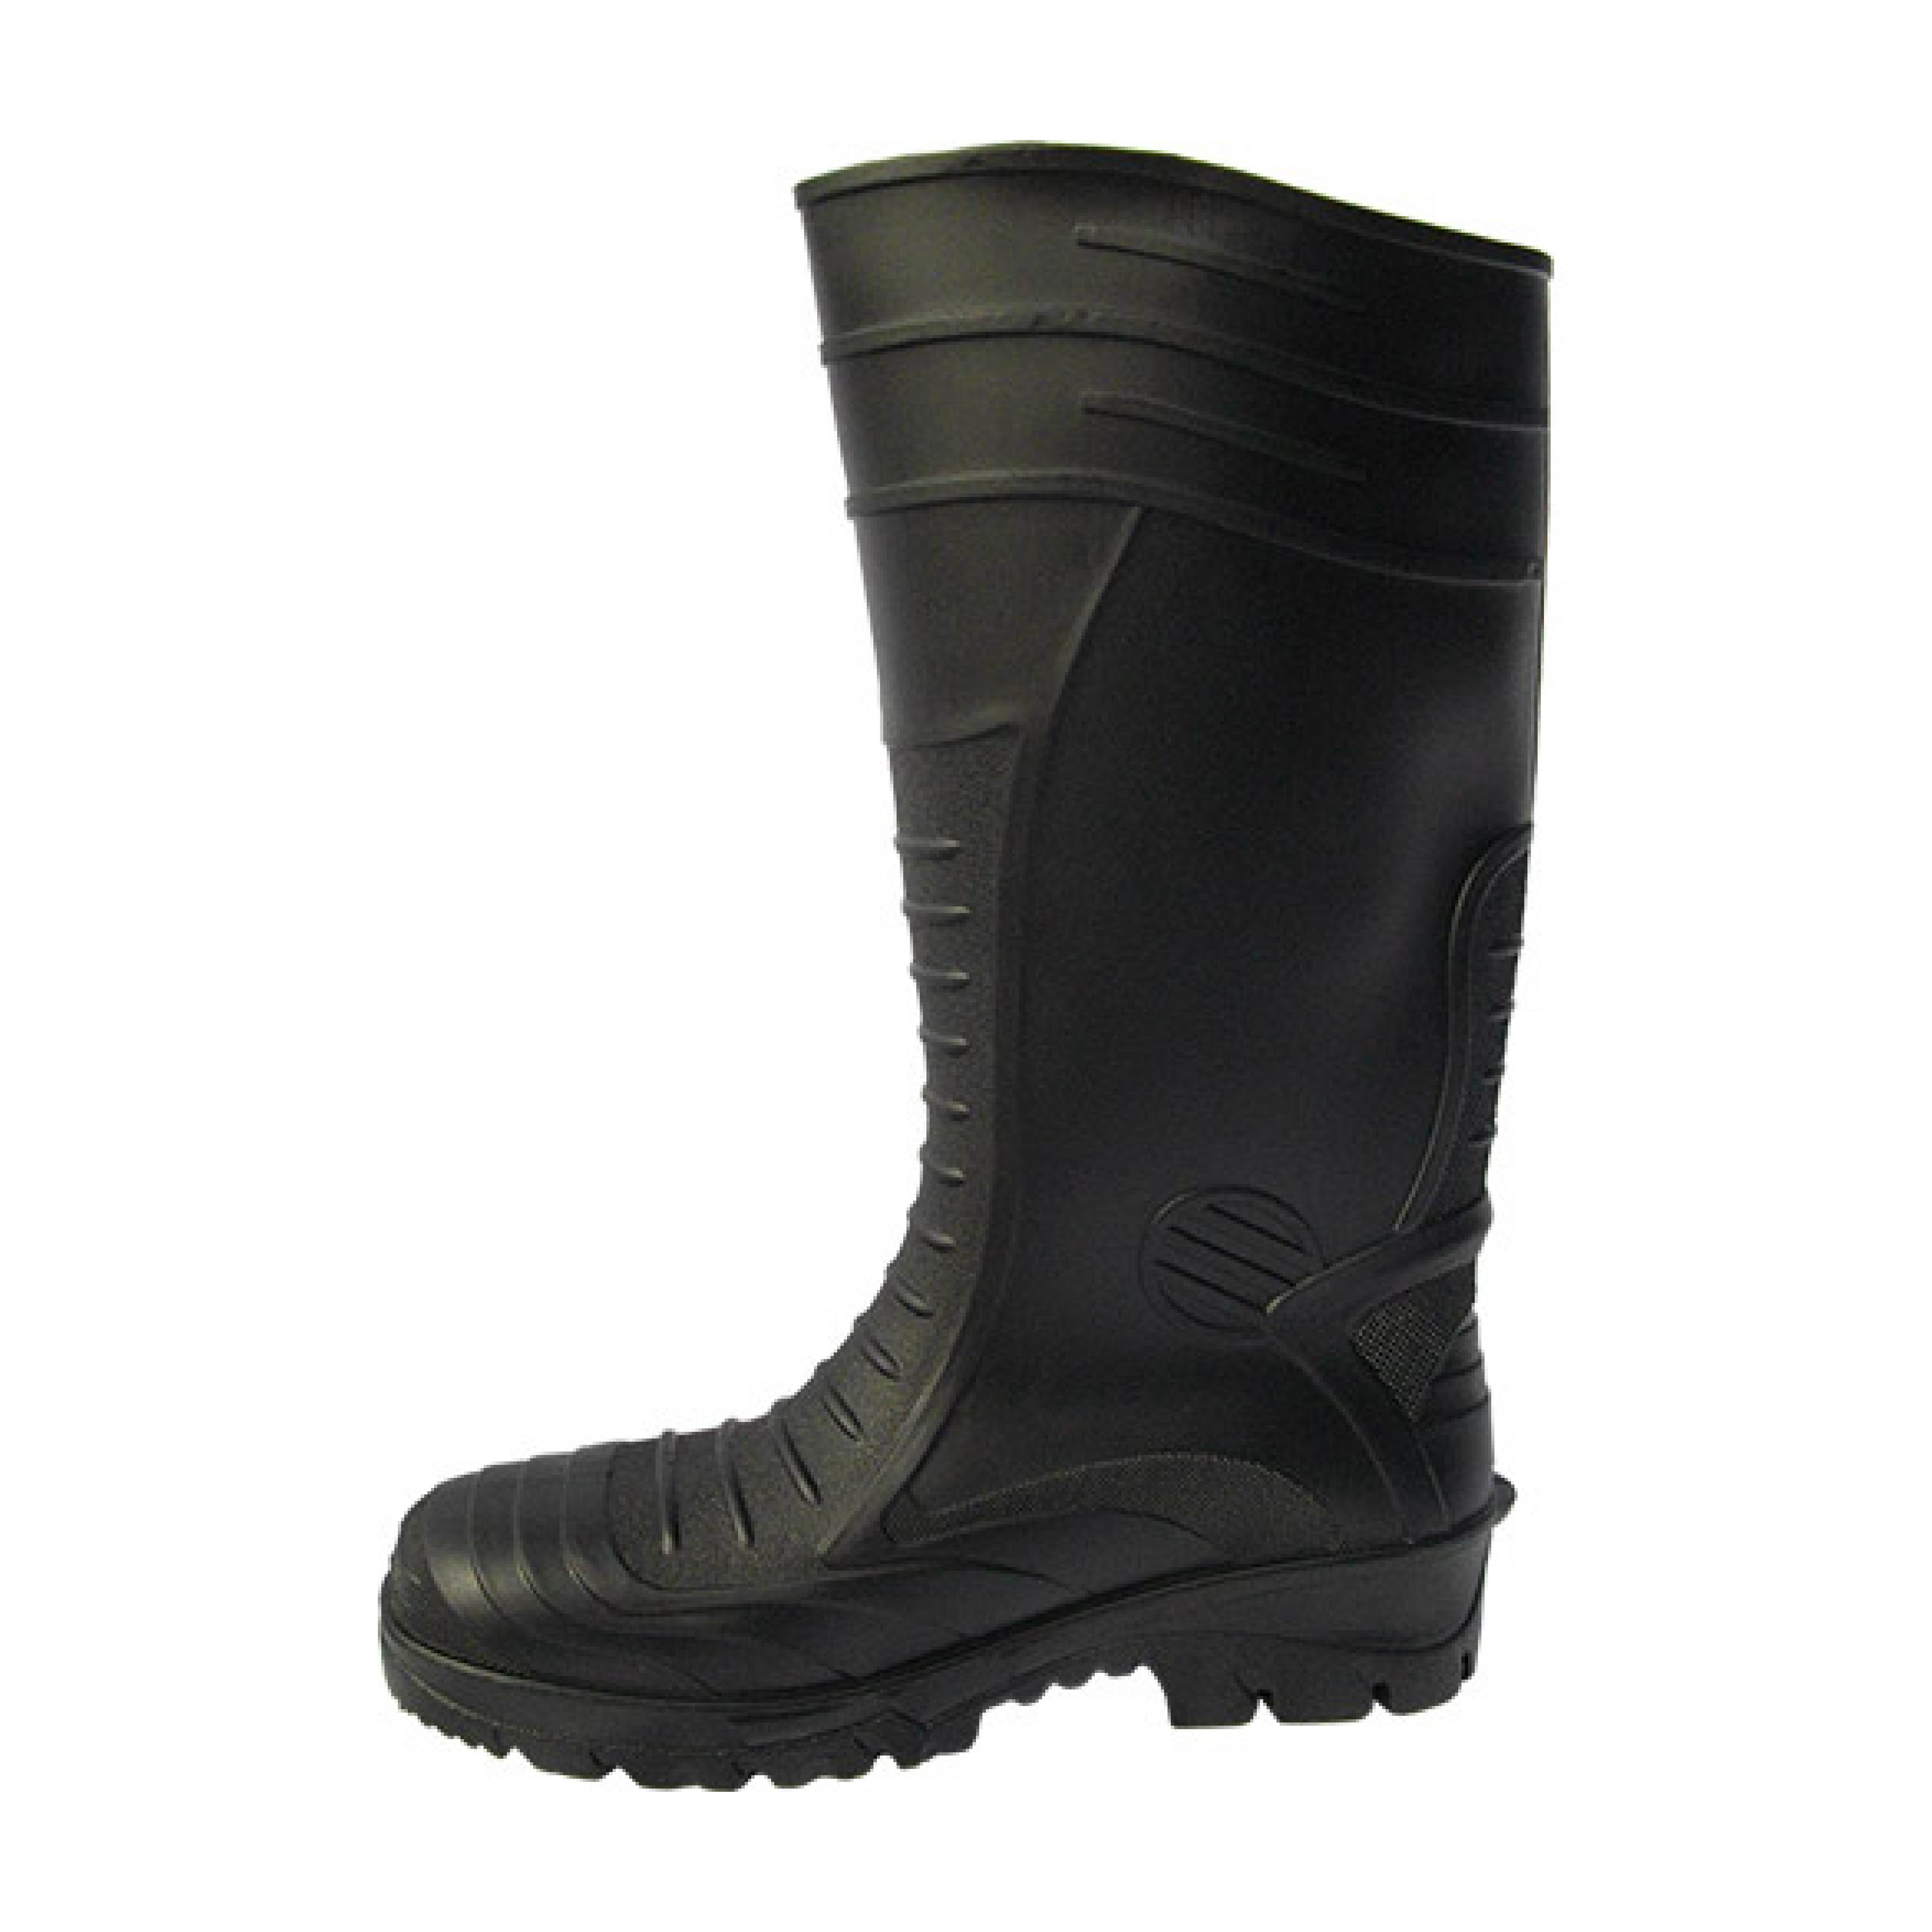 Black PVC Safety Gumboot Size 12 (1 pair)